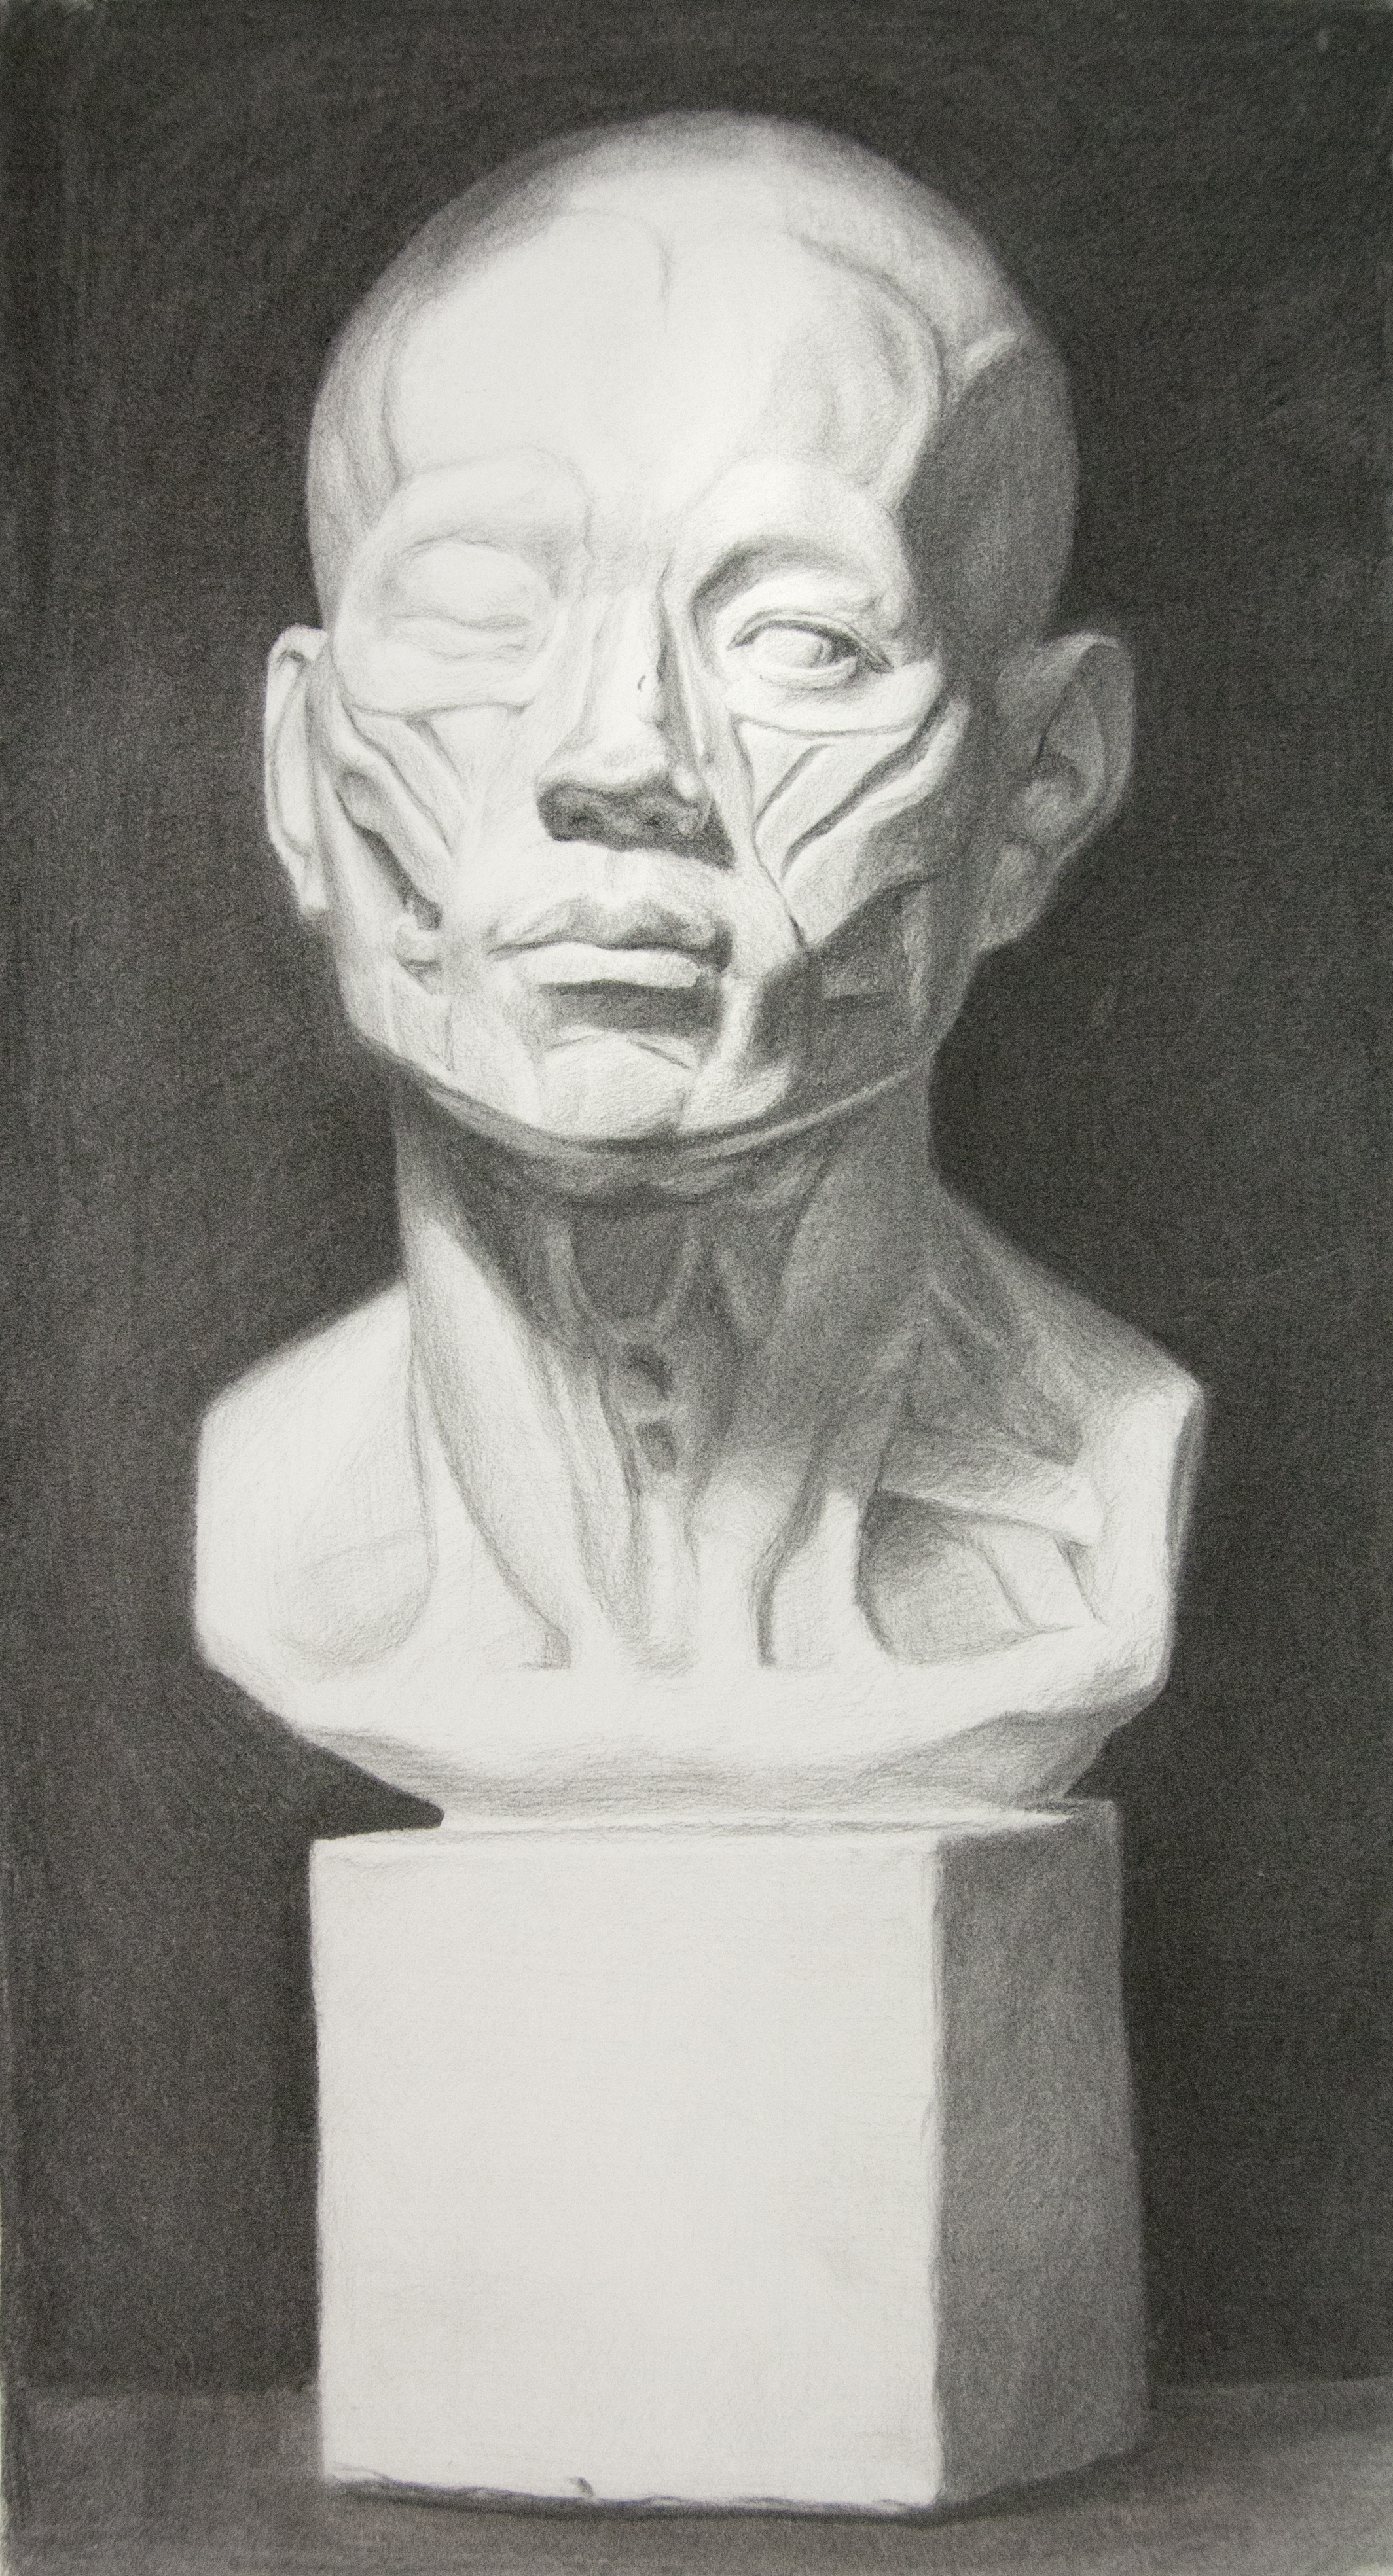  Andrew Cortez, cast drawing student. 